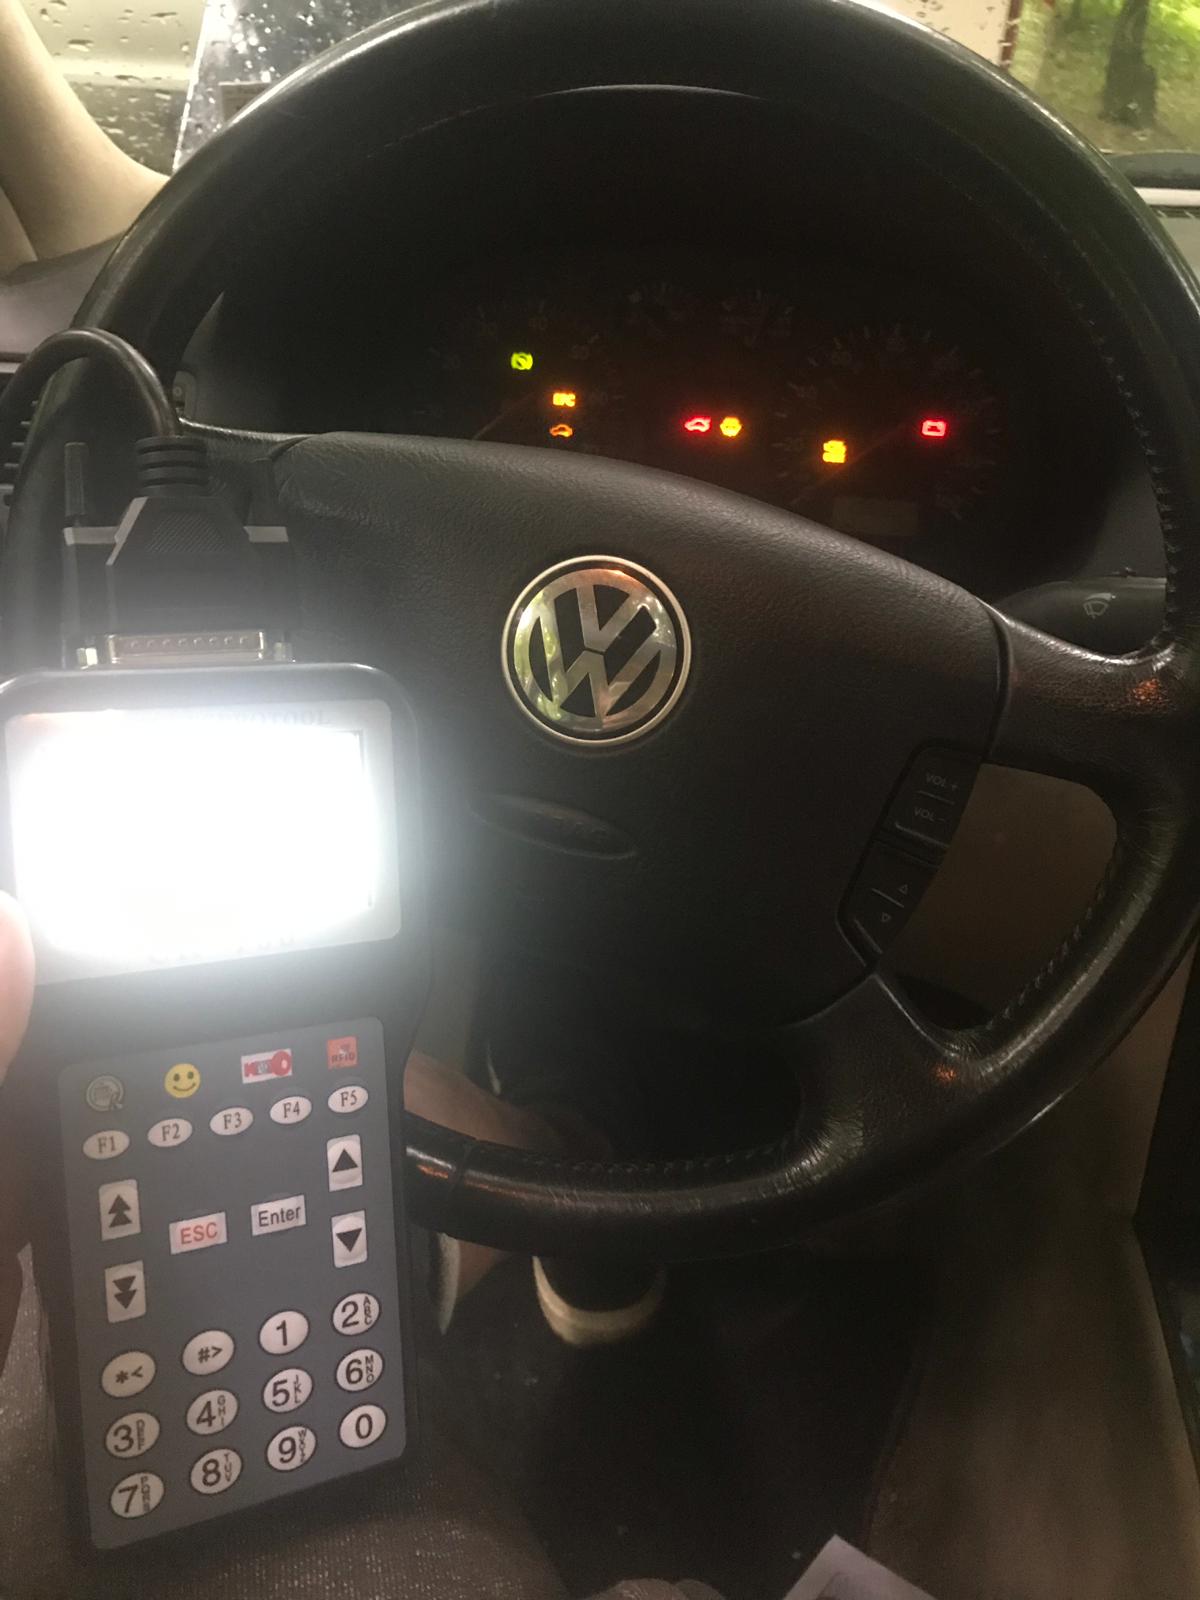 Volkswagen Key Replacement - What To Do, Options, Costs, Tips & More